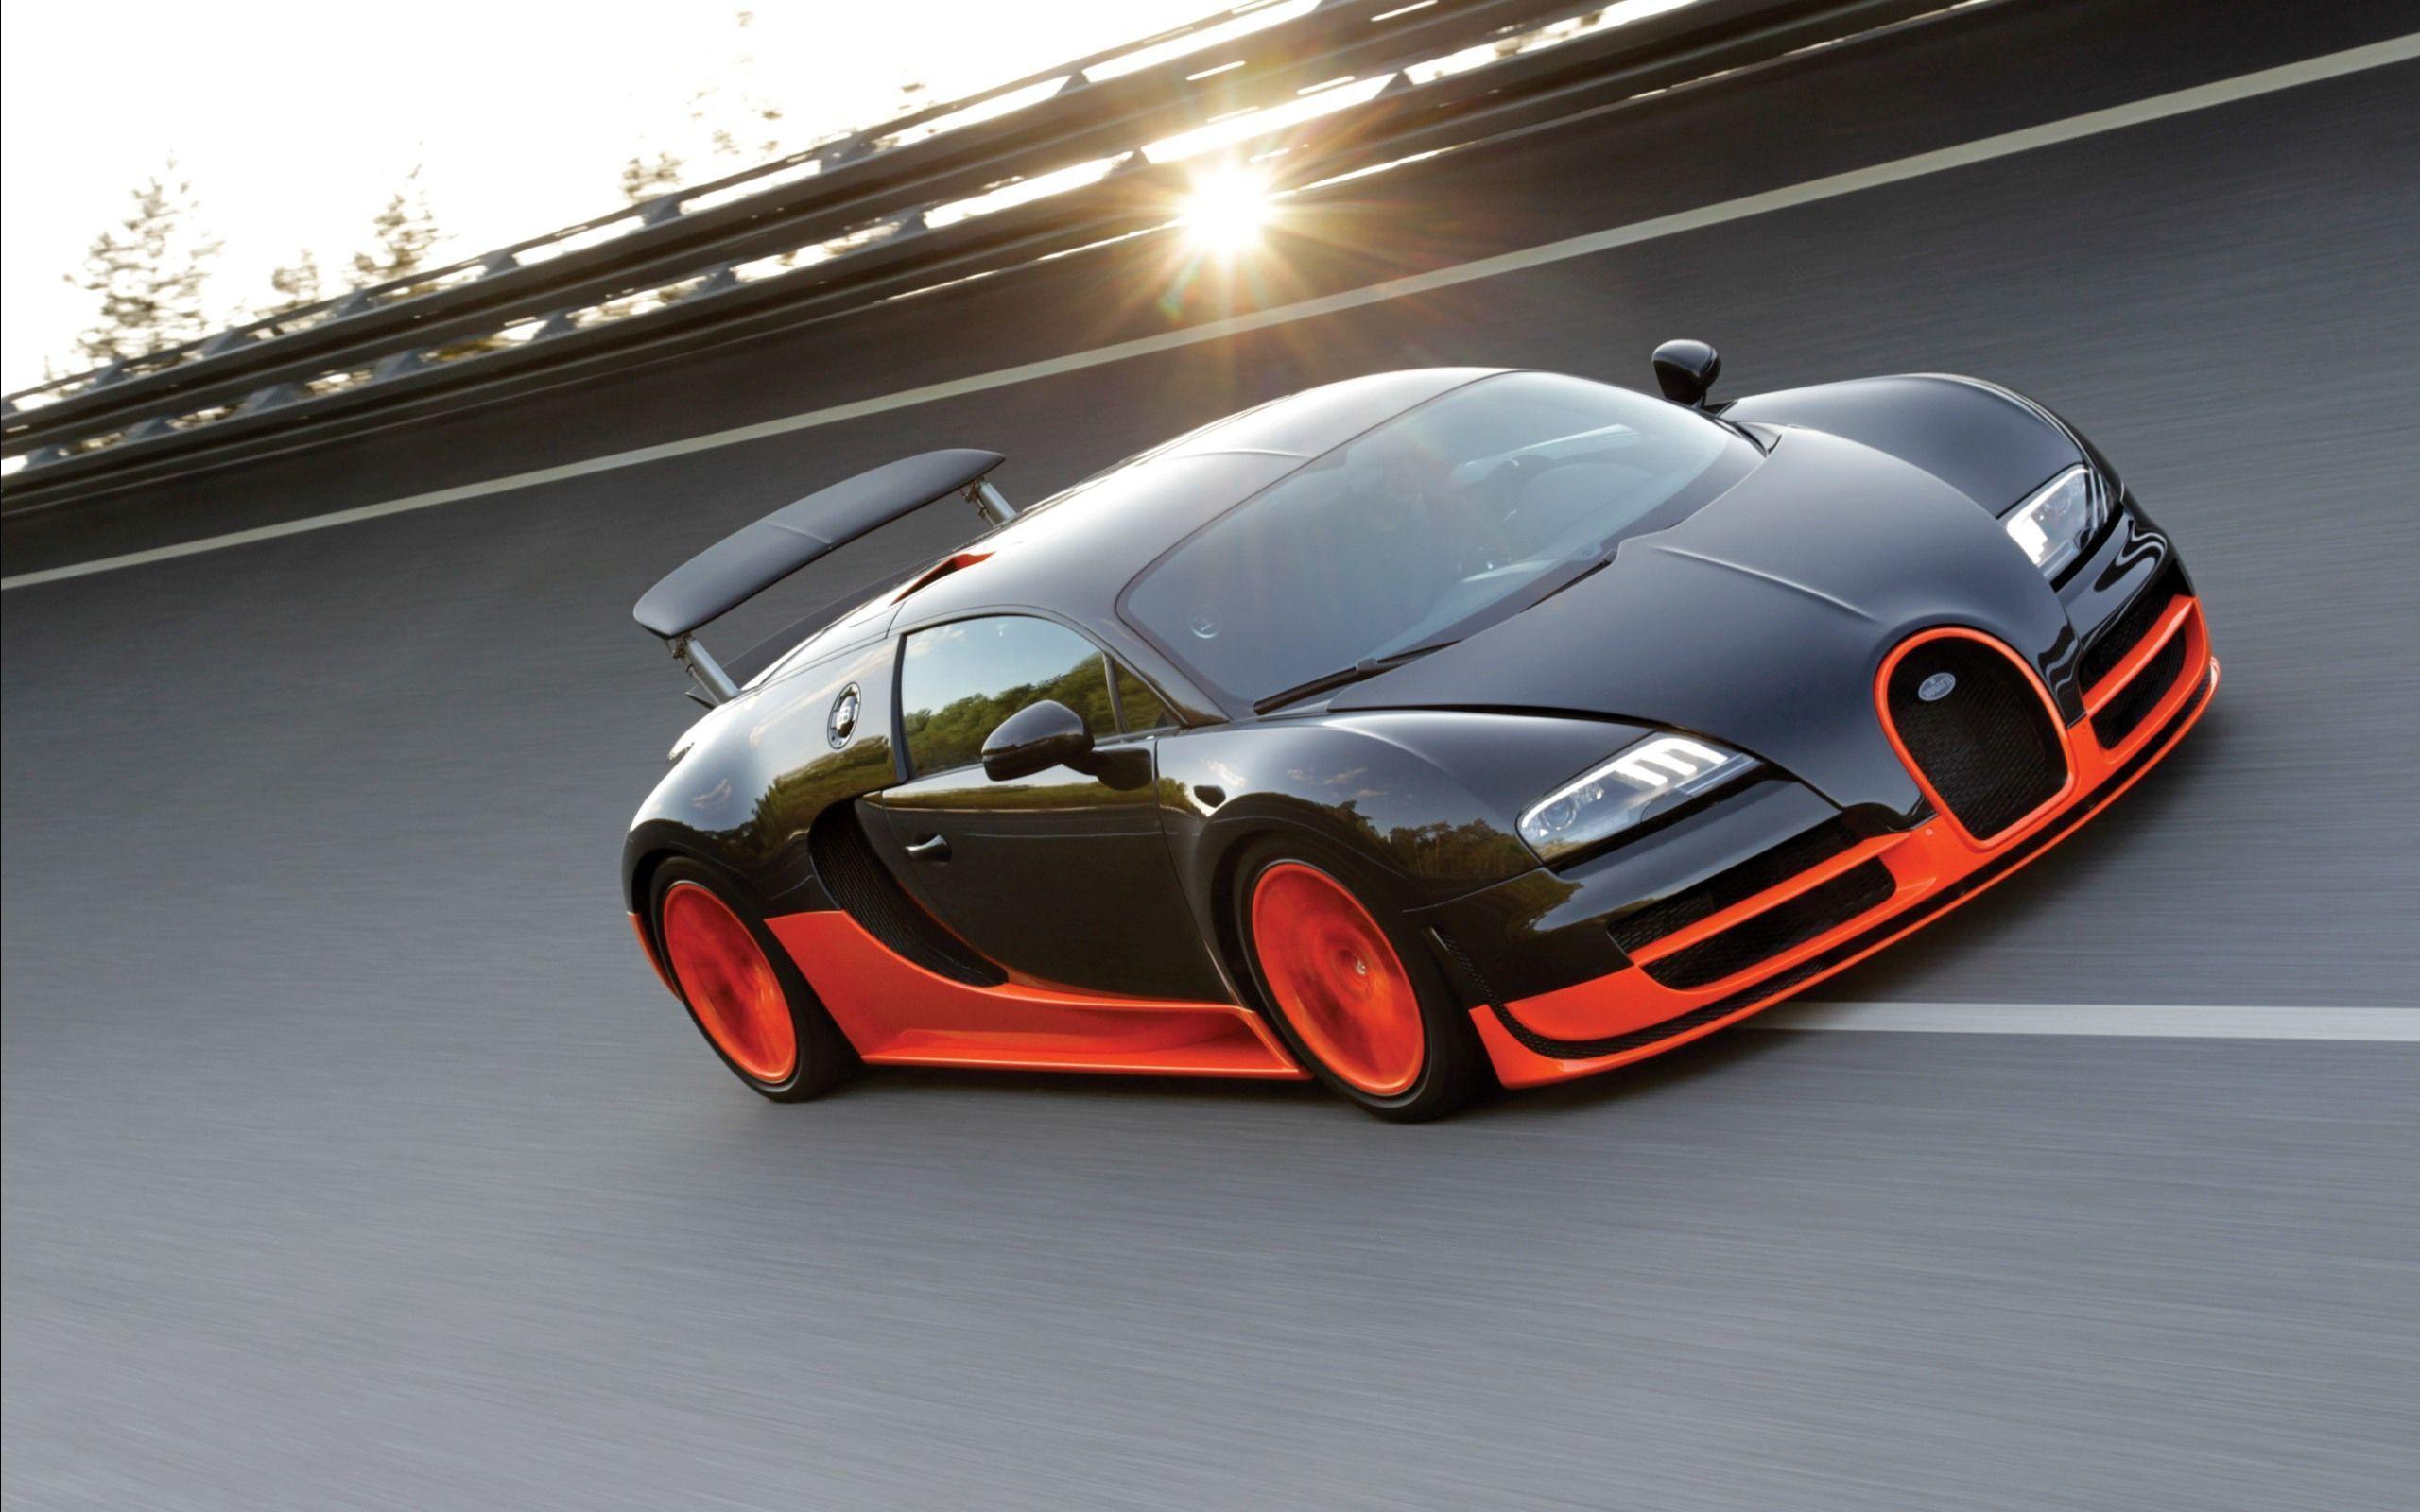 Nothing found for Bugatti Veyron Super Sport Image HD Wallpaper HD